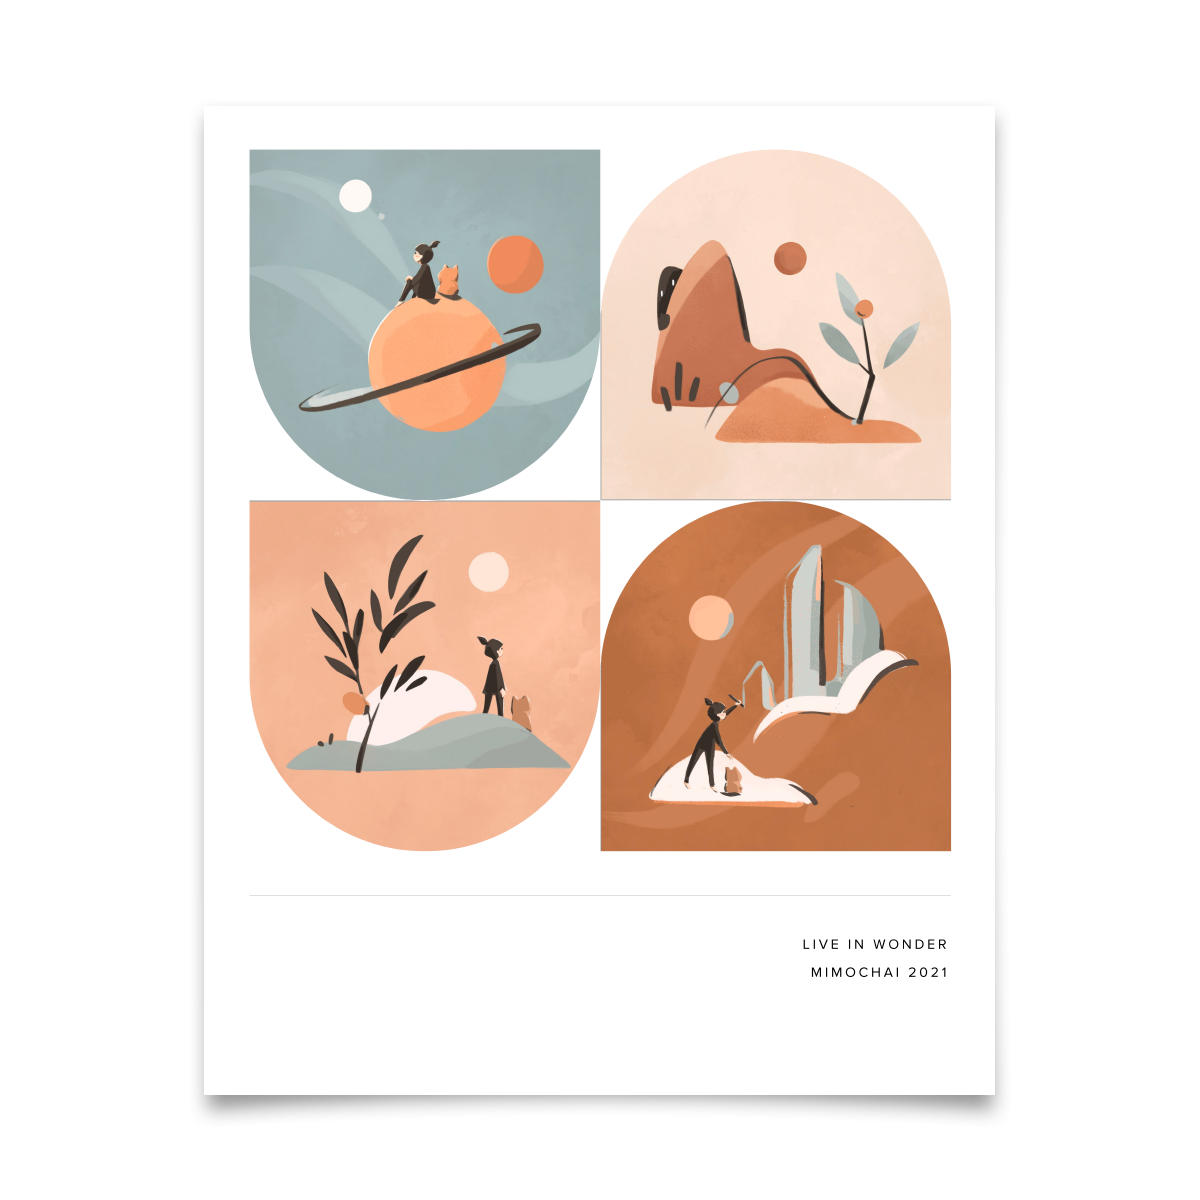 Artifact Uprising Poster Print featuring four illustrations from Mimo Chai arranged as a quartet of geometric shapes